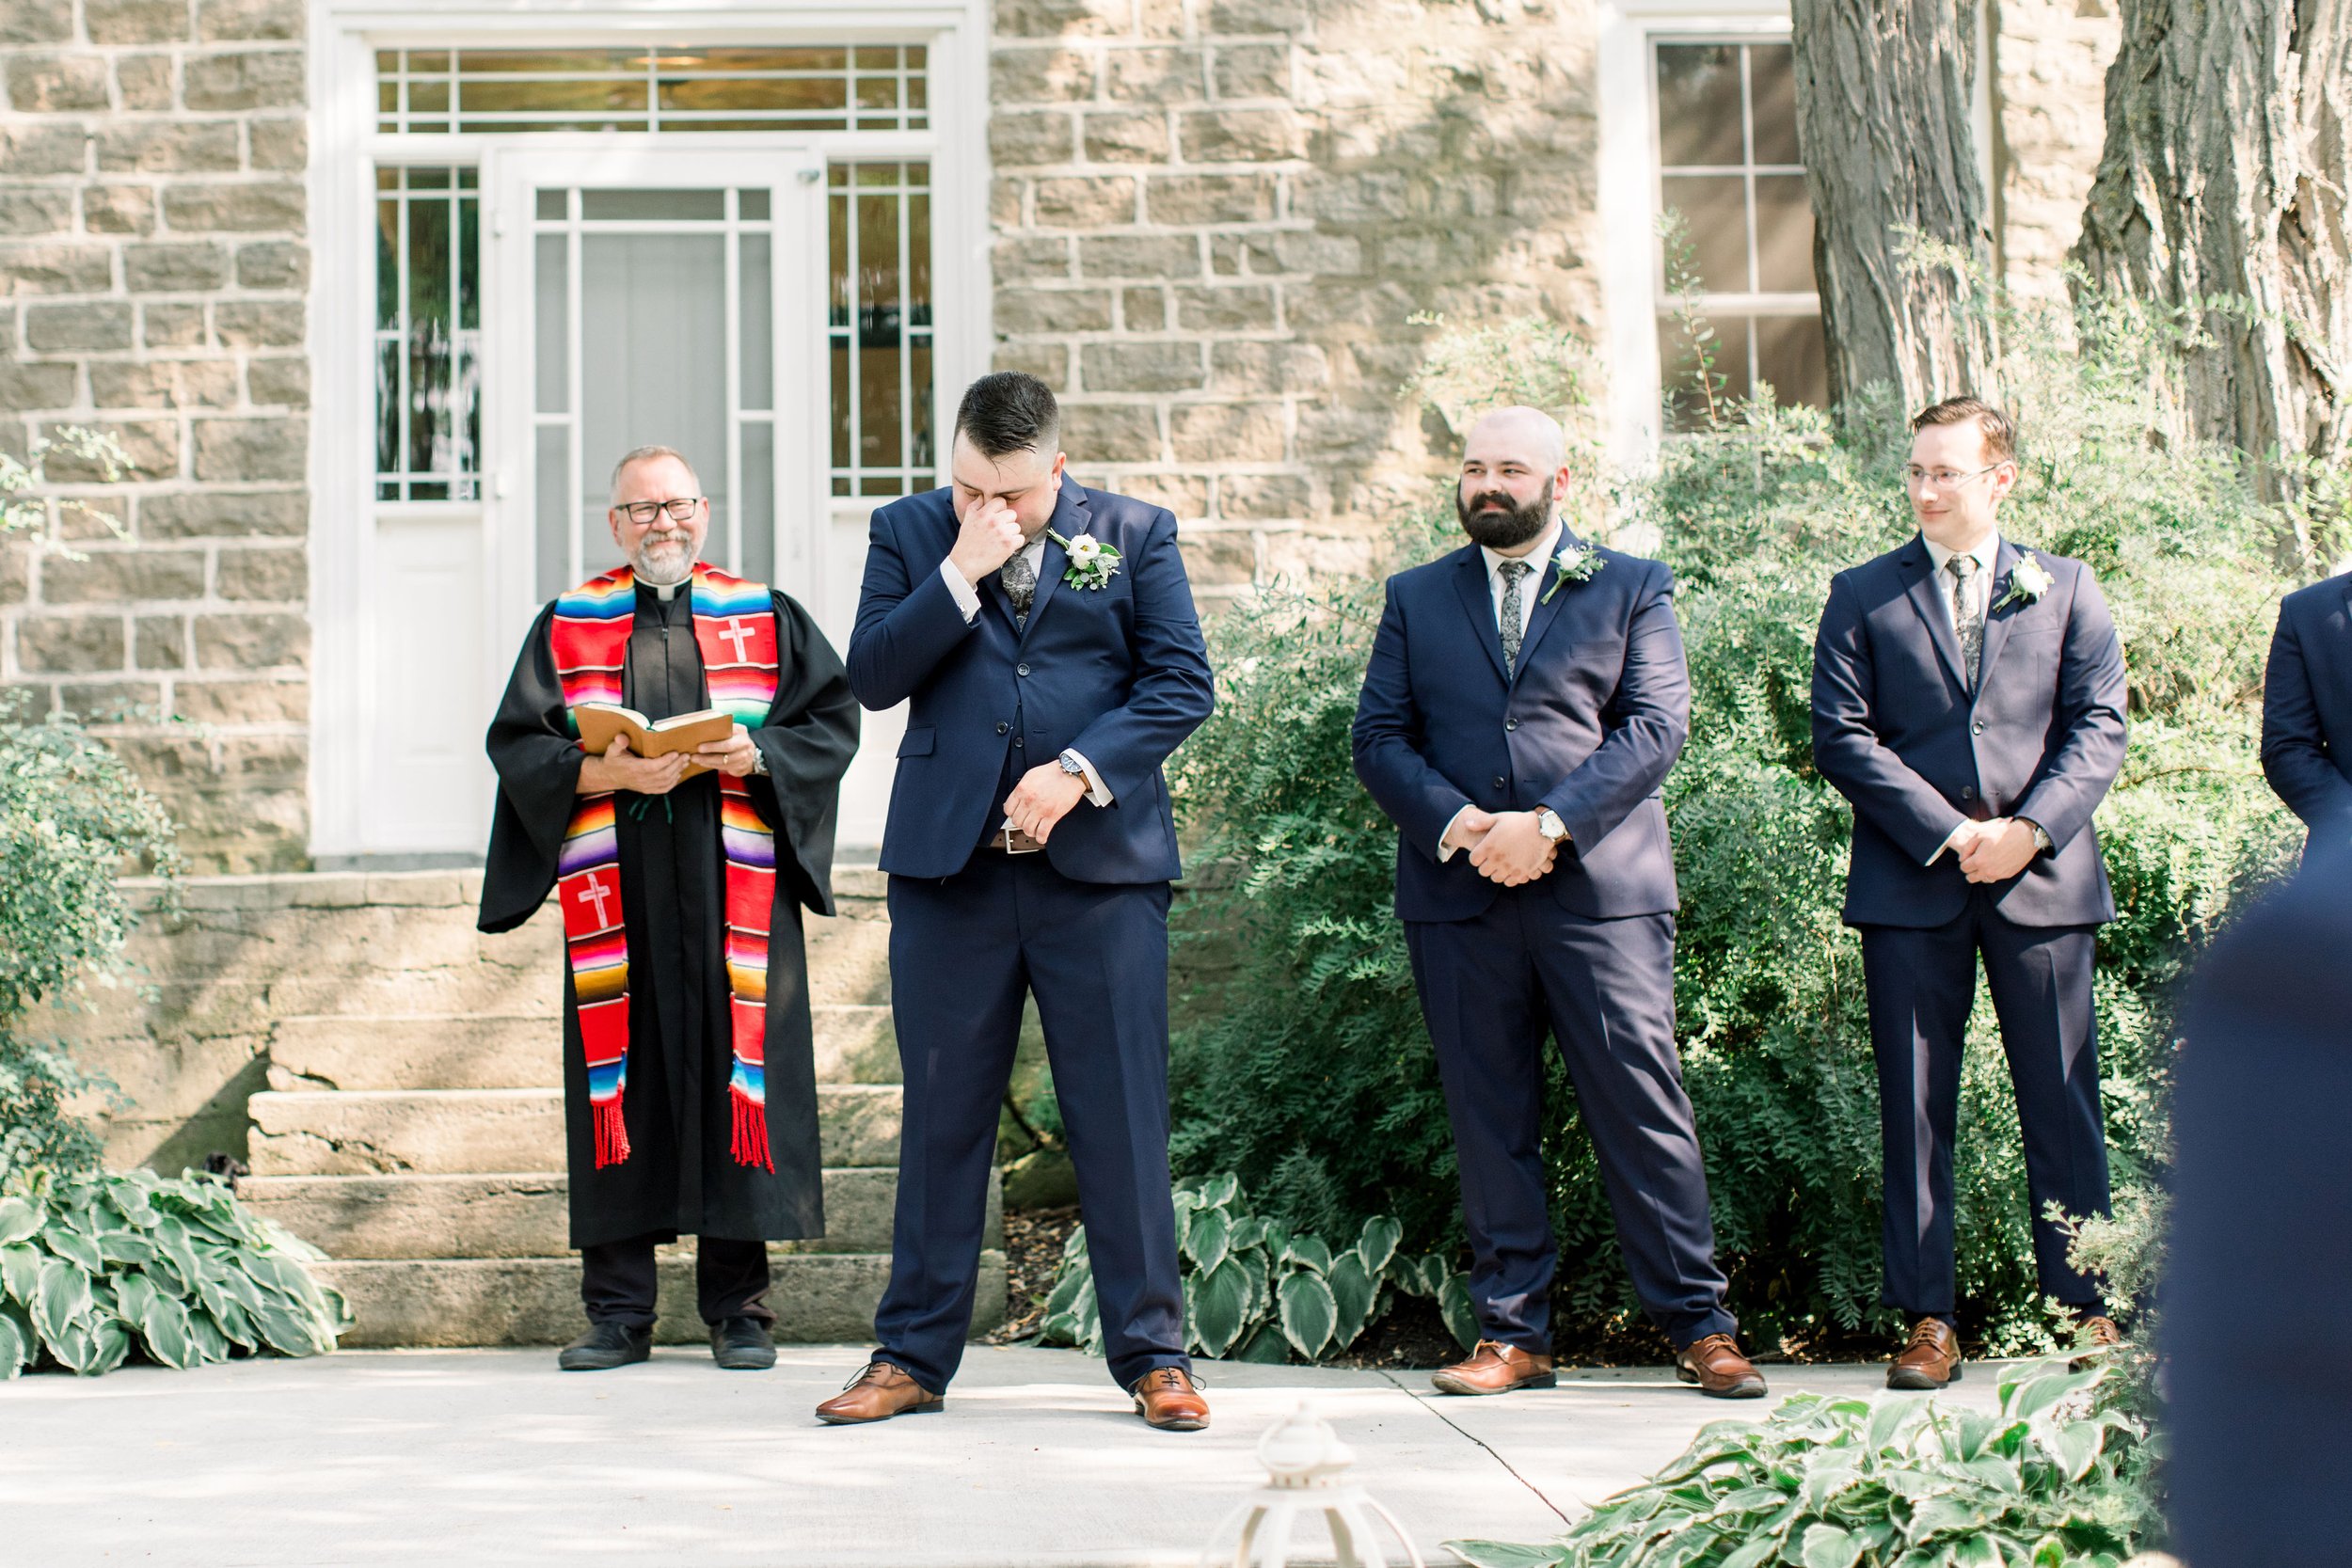  Groom tears up as he sees his bride coming down the aisle at Stonefield Estates in Ontario by Chelsea Mason Photography. groom tears #StonefieldEstates #Ontarioweddings #Chelseamasonphotography #Chelseamasonengagements #Ontarioweddingphotographers 